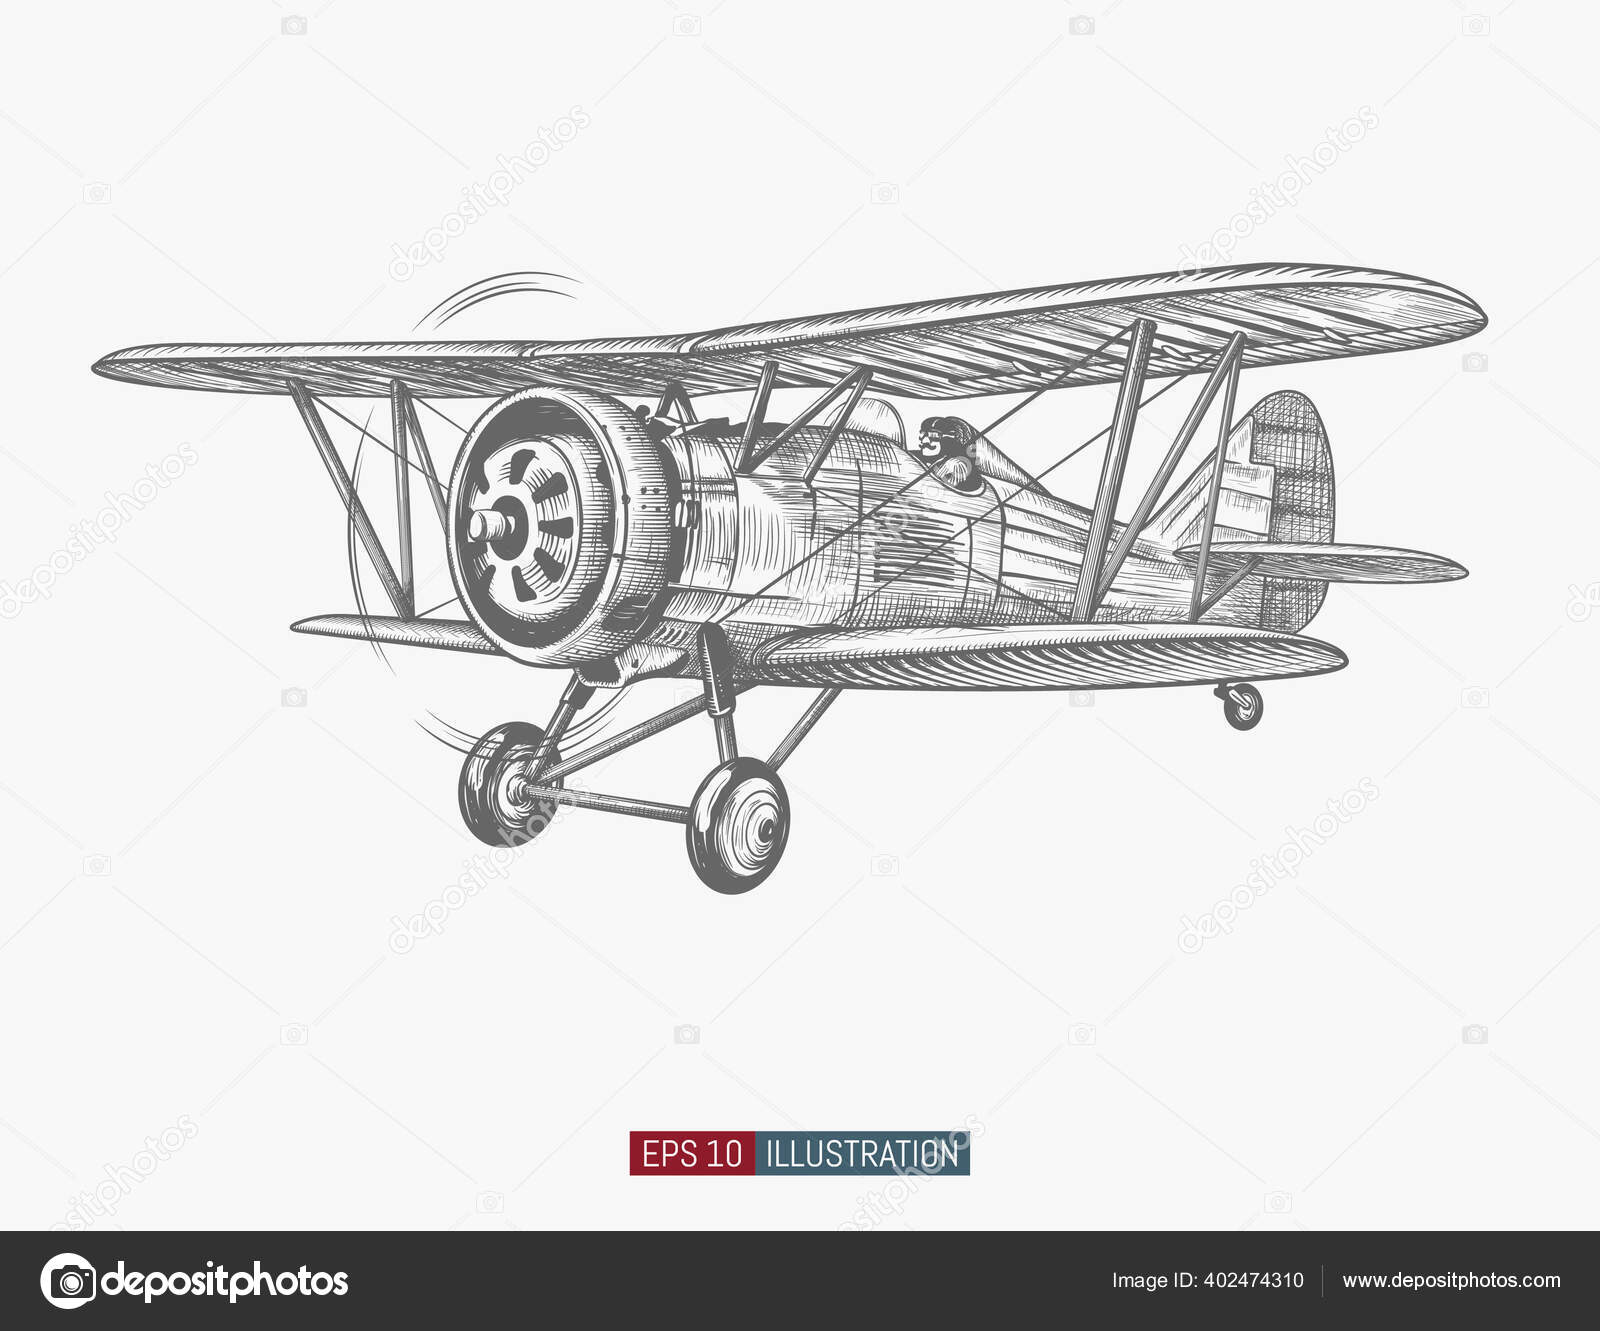 How to Draw a Biplane in 11 Simple Steps - VerbNow